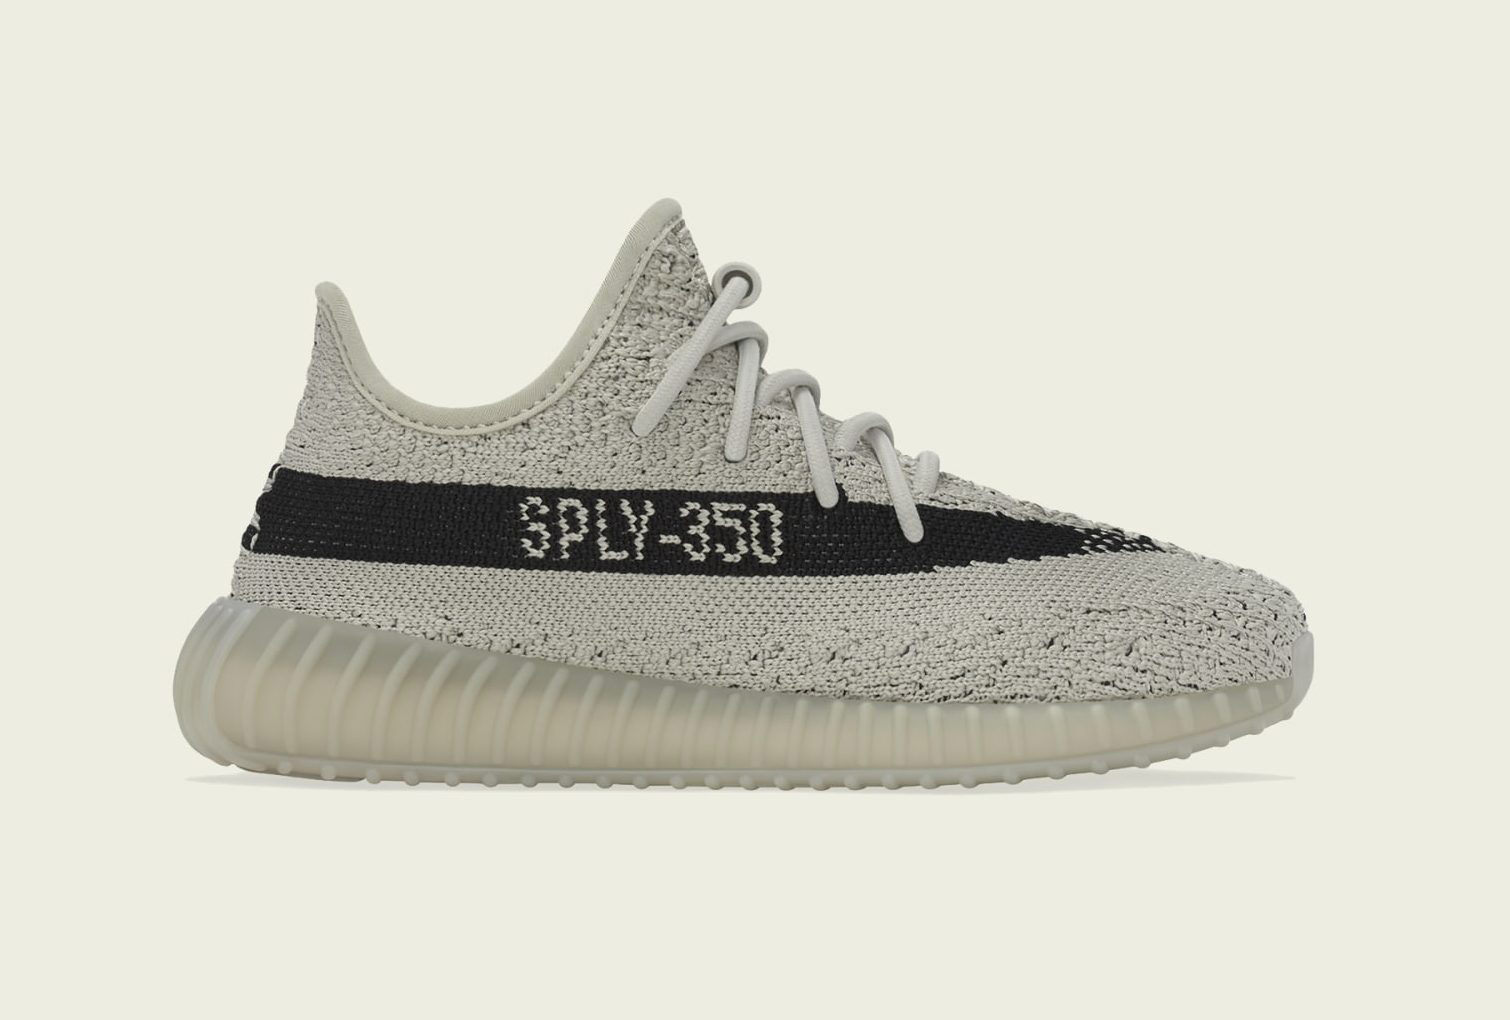 Adidas Says It Will Not Sell Yeezy Designs After All Current Stock Is Sold